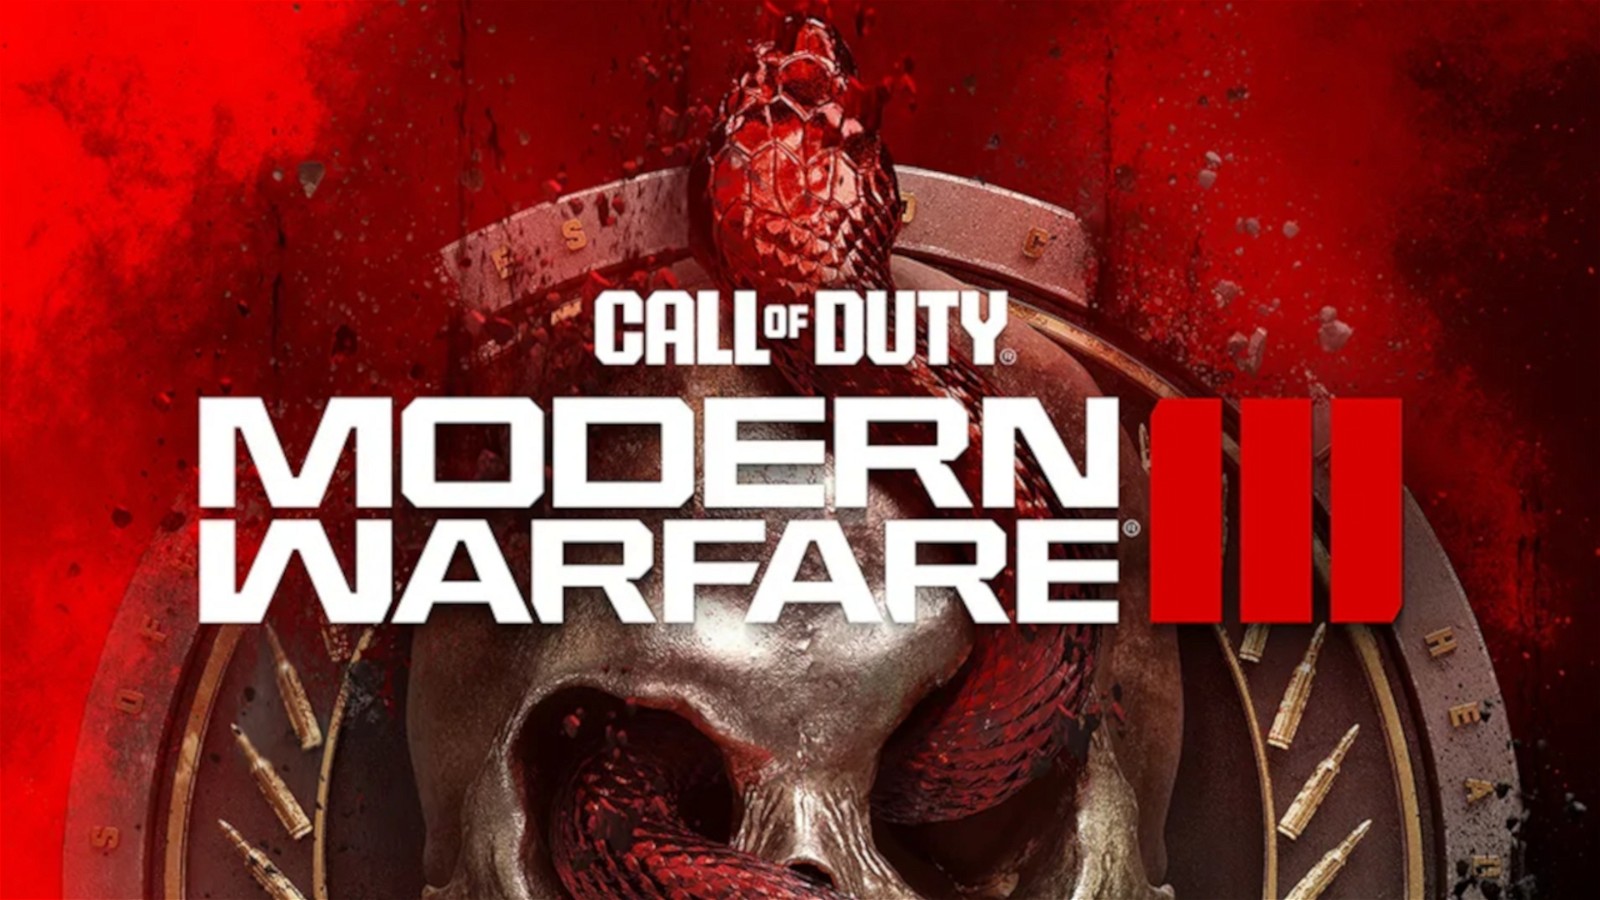 Details About Call of Duty: Modern Warfare 3 PC System Requirements